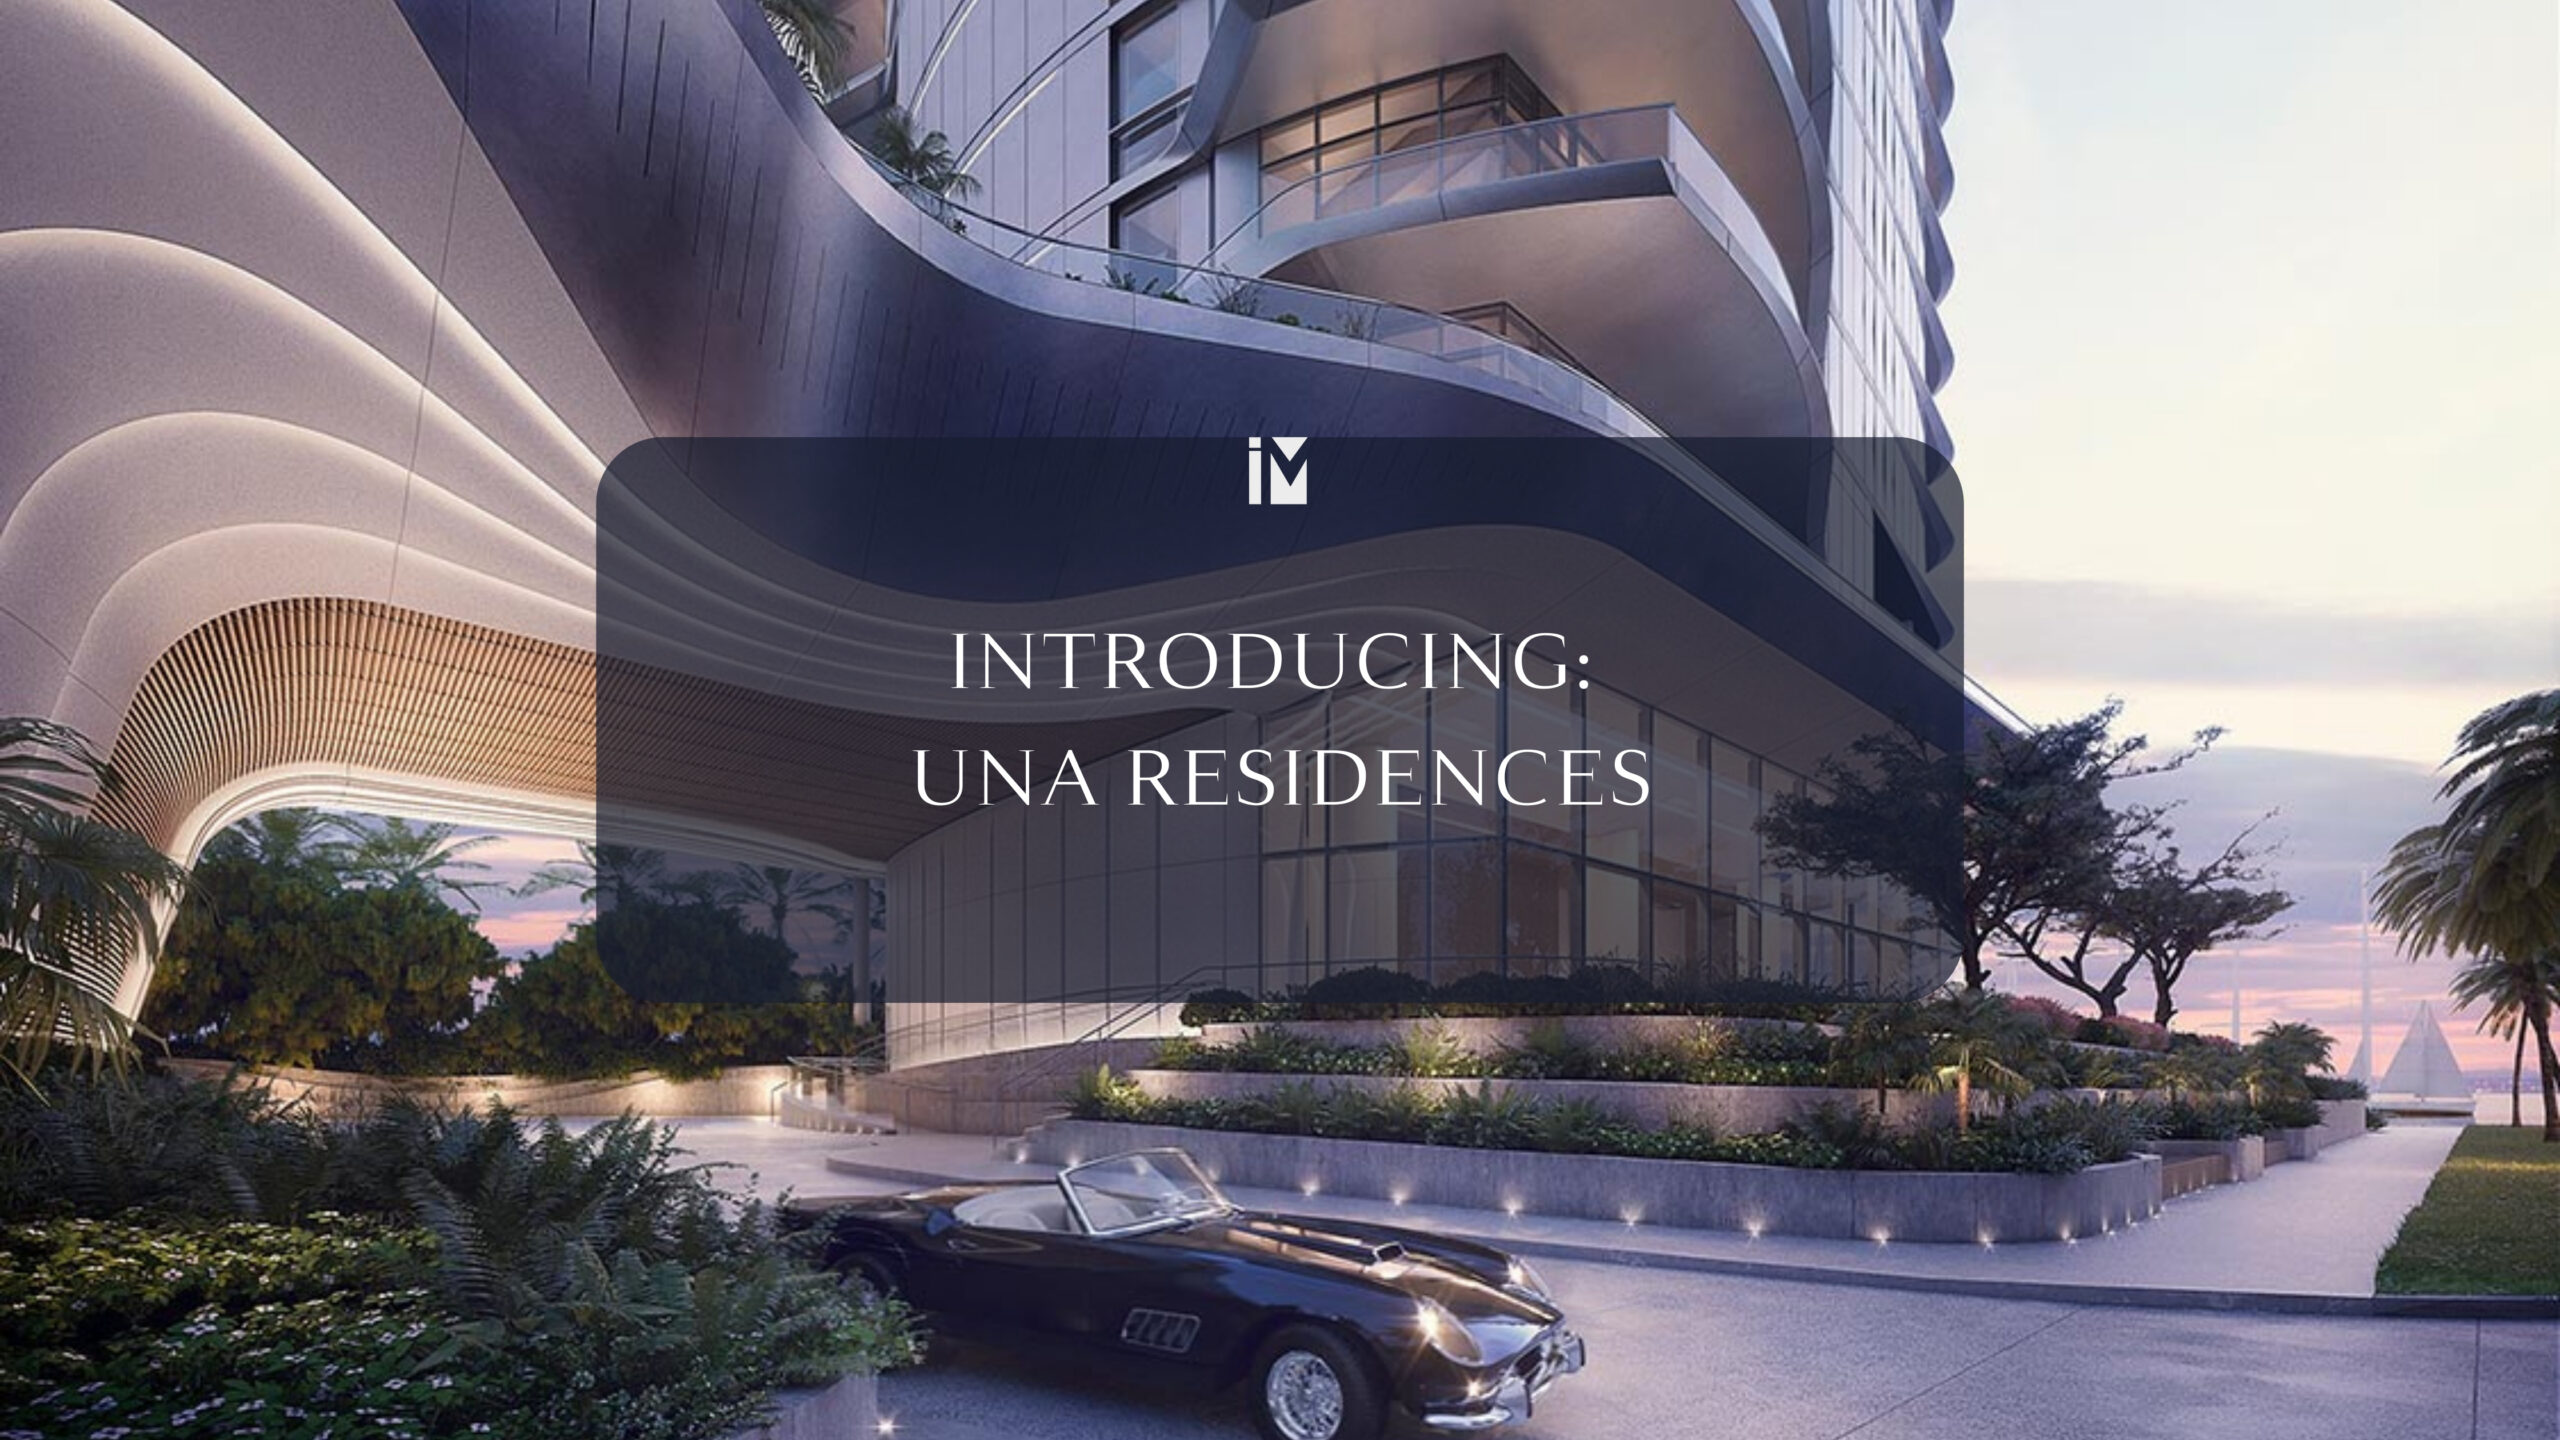 Una Residences: A Nautical Haven Redefining Brickell Waterfront Living